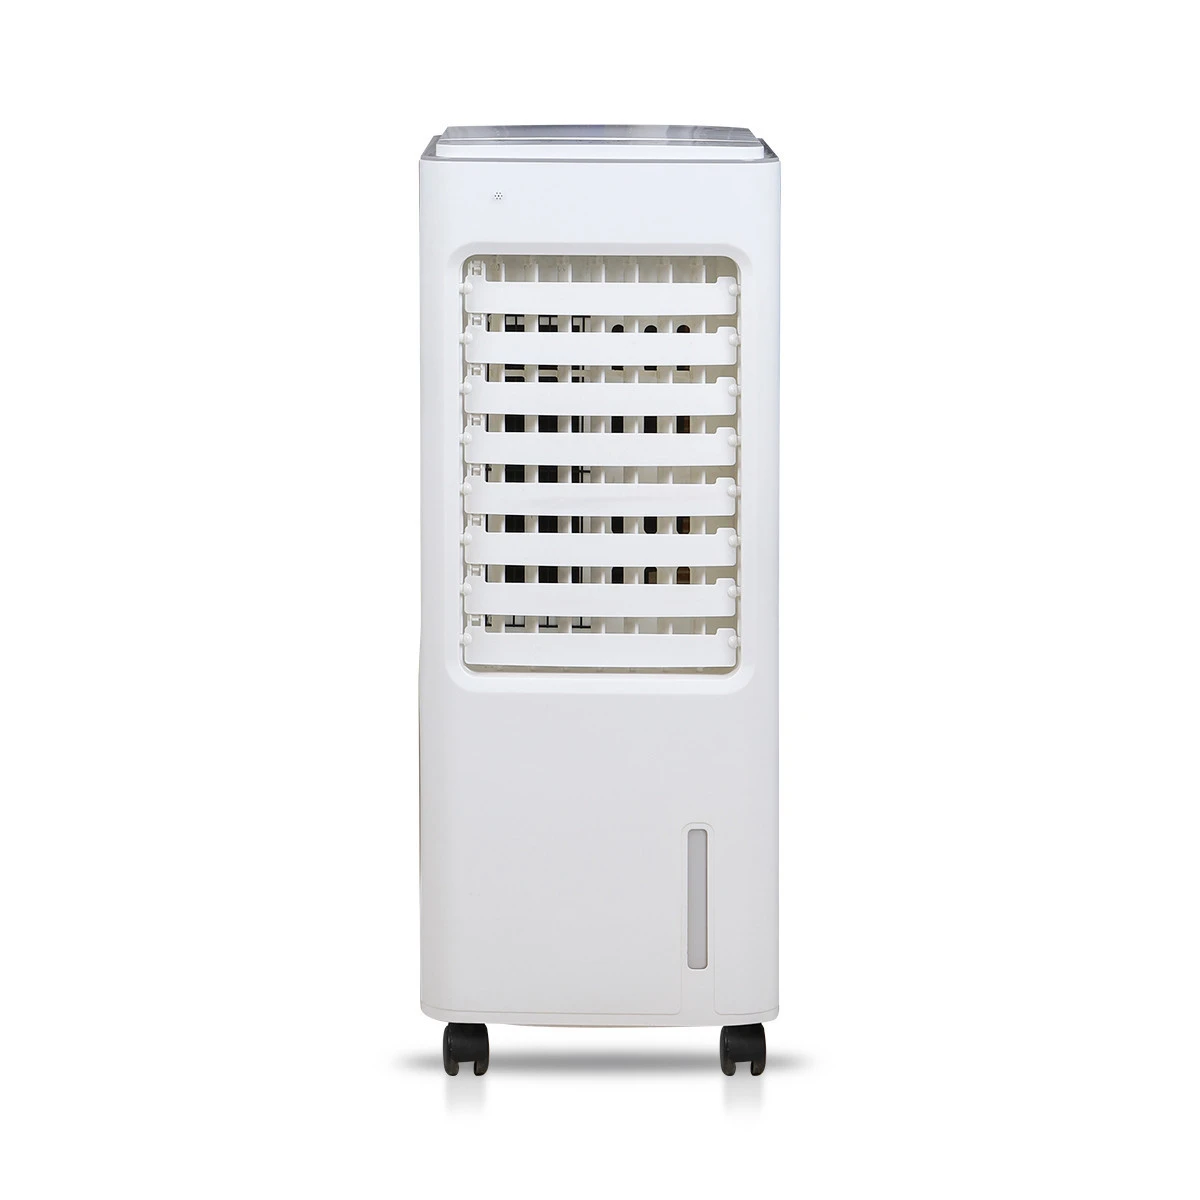 Domestic air cooler filter tank low noise portable air coolers machine